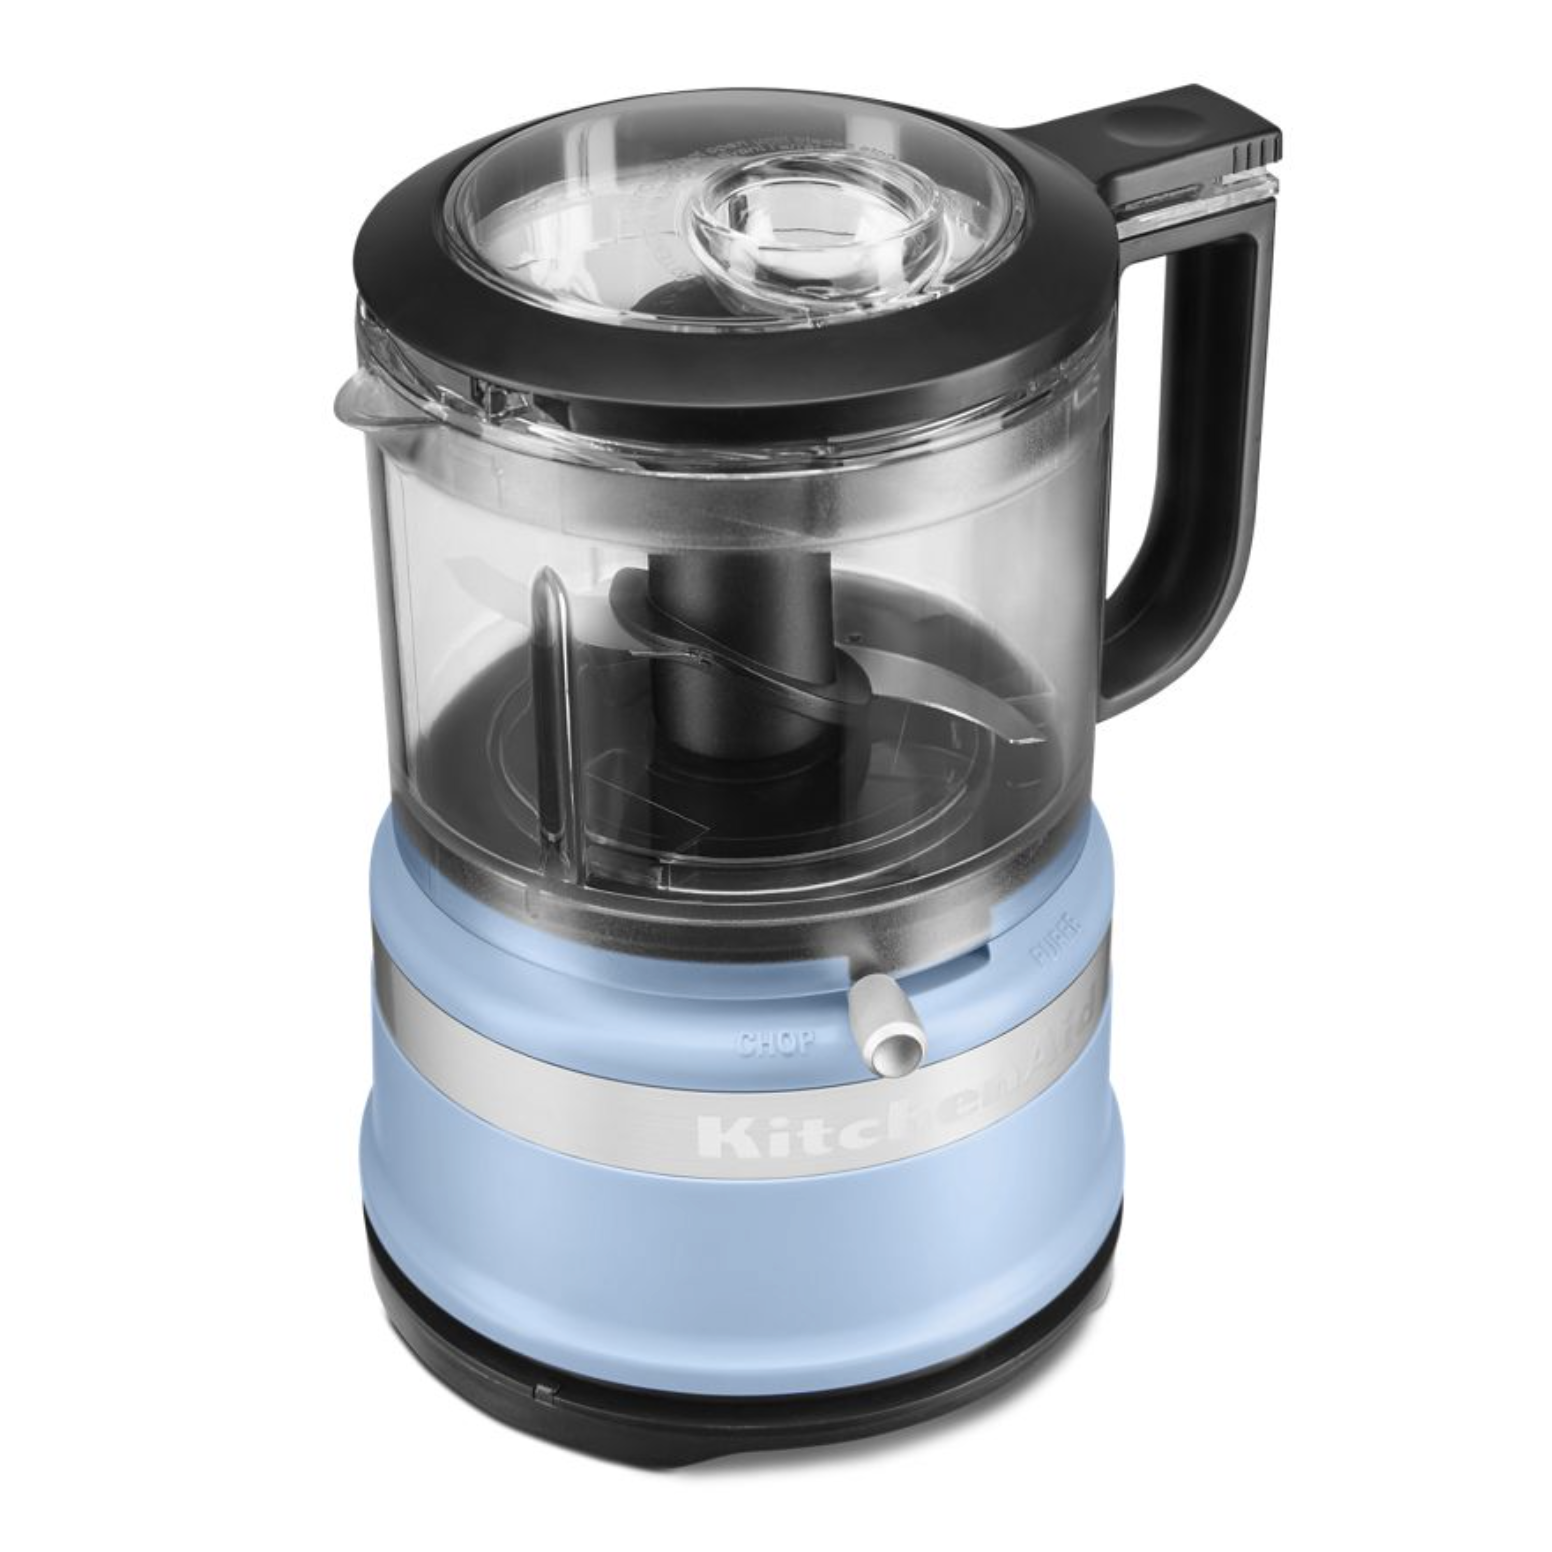 KitchenAid 3.5 Cup Food Chopper in Ice